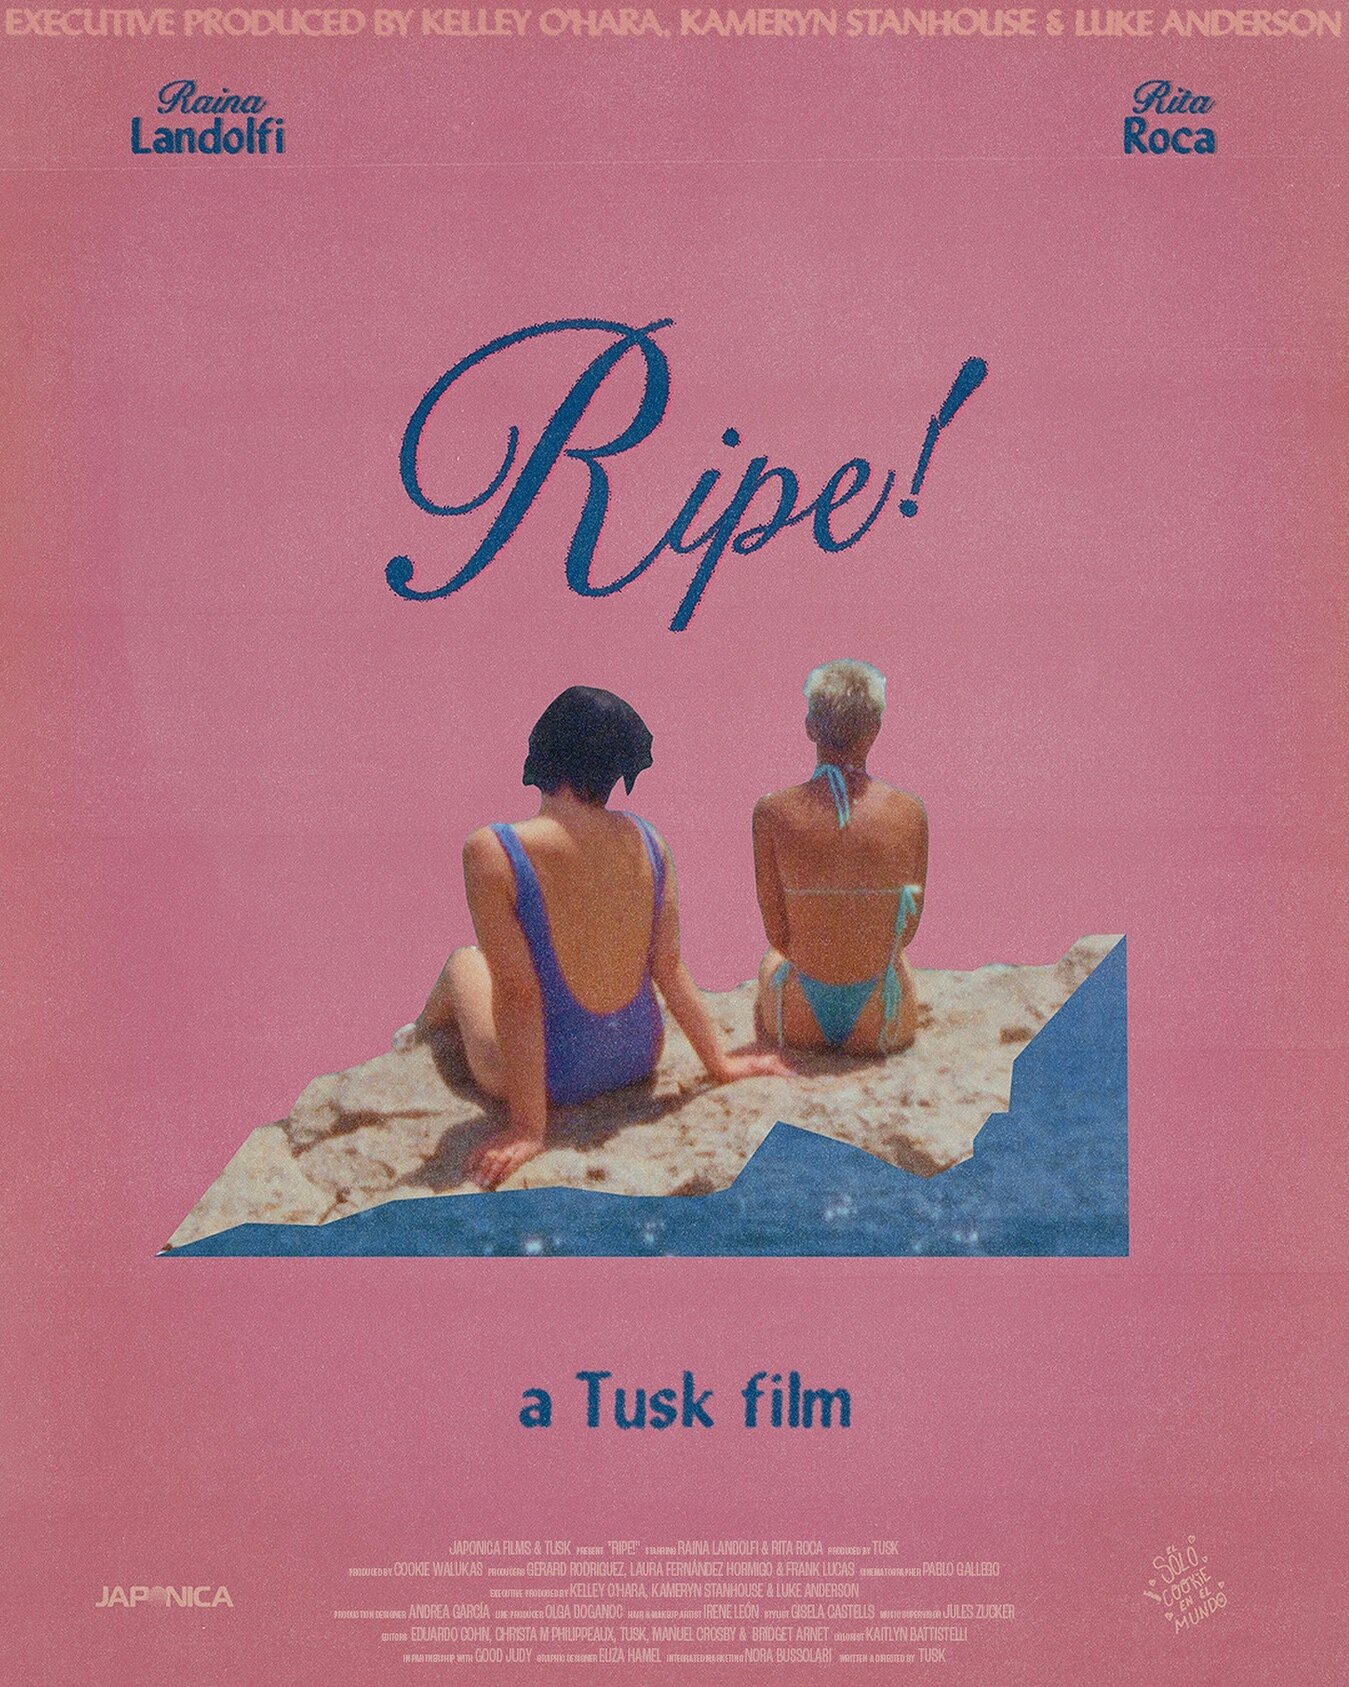 🫦🧚&zwj;♀️ @ripe__film POSTER REVEAL! 🎨🌊

&ldquo;Ripe!&rdquo; isn&rsquo;t just a title; it&rsquo;s our shout from the other side of shame. an ode to our ripening as people. queer people! 

🇪🇸🌎 re: people, kudos to Ripe&rsquo;s team for allowing